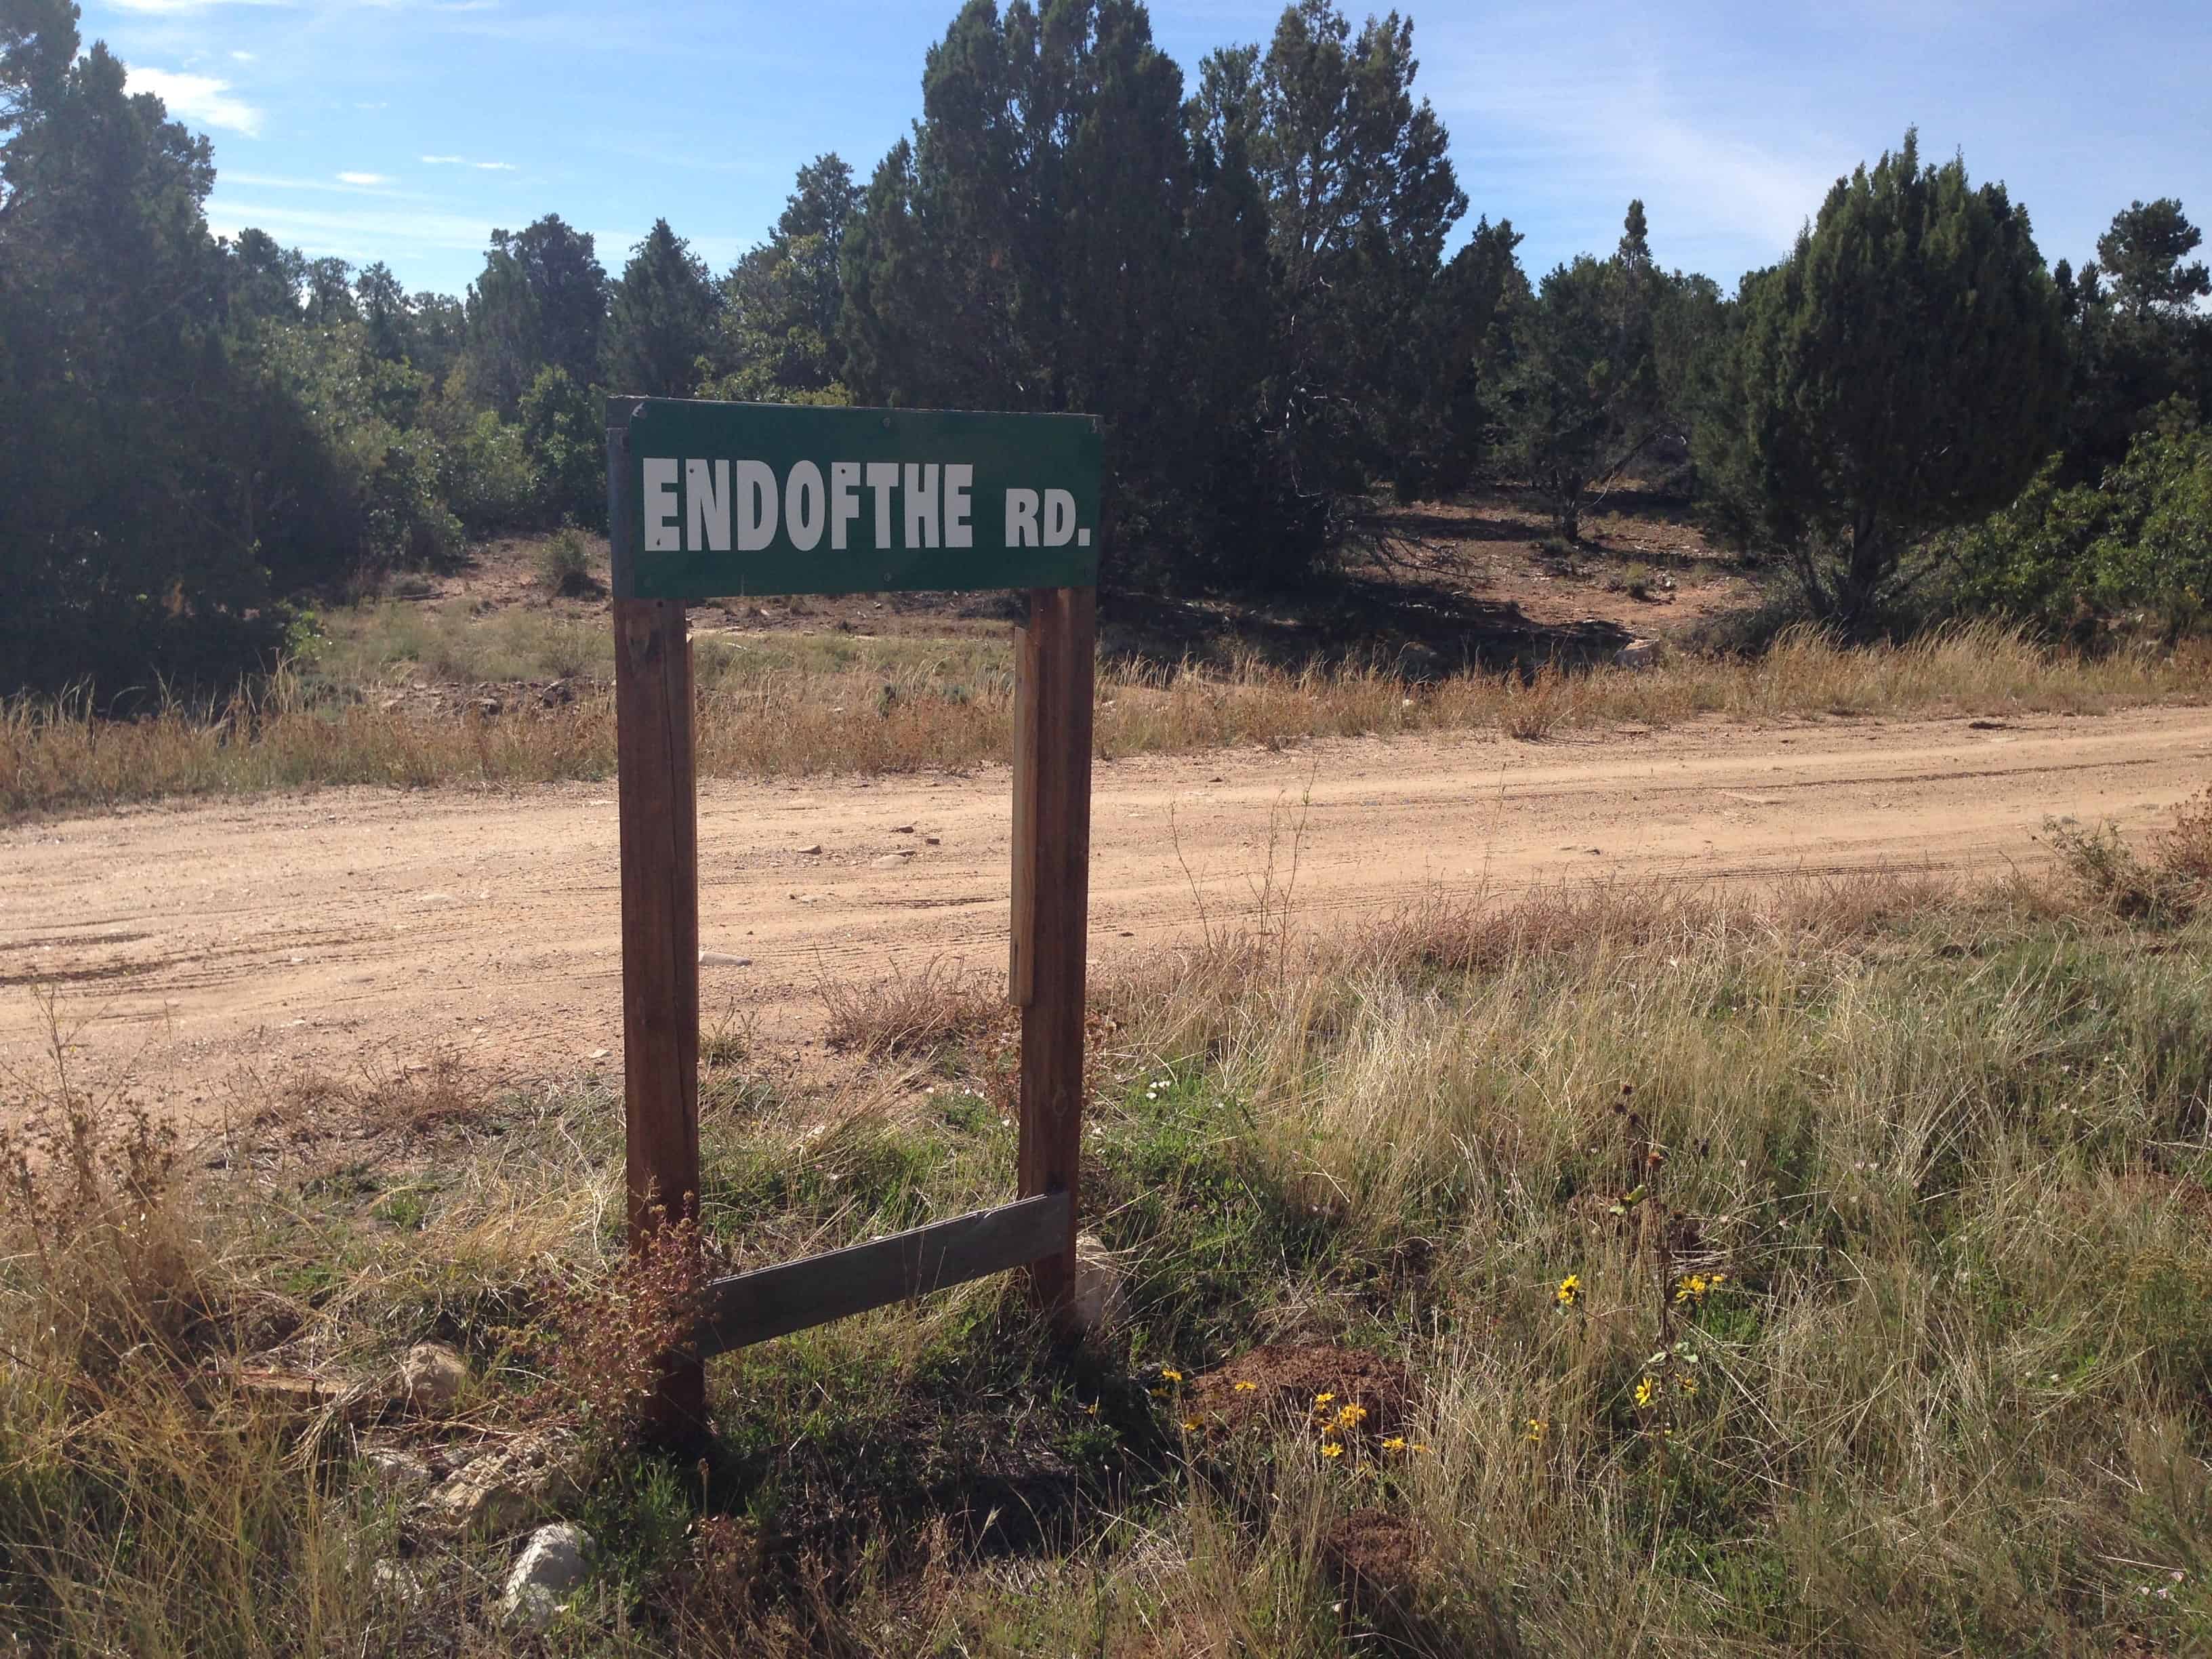 Sign for the Endothe Rd. on the way to Zion Ponderosa Ranch Resort in Utah